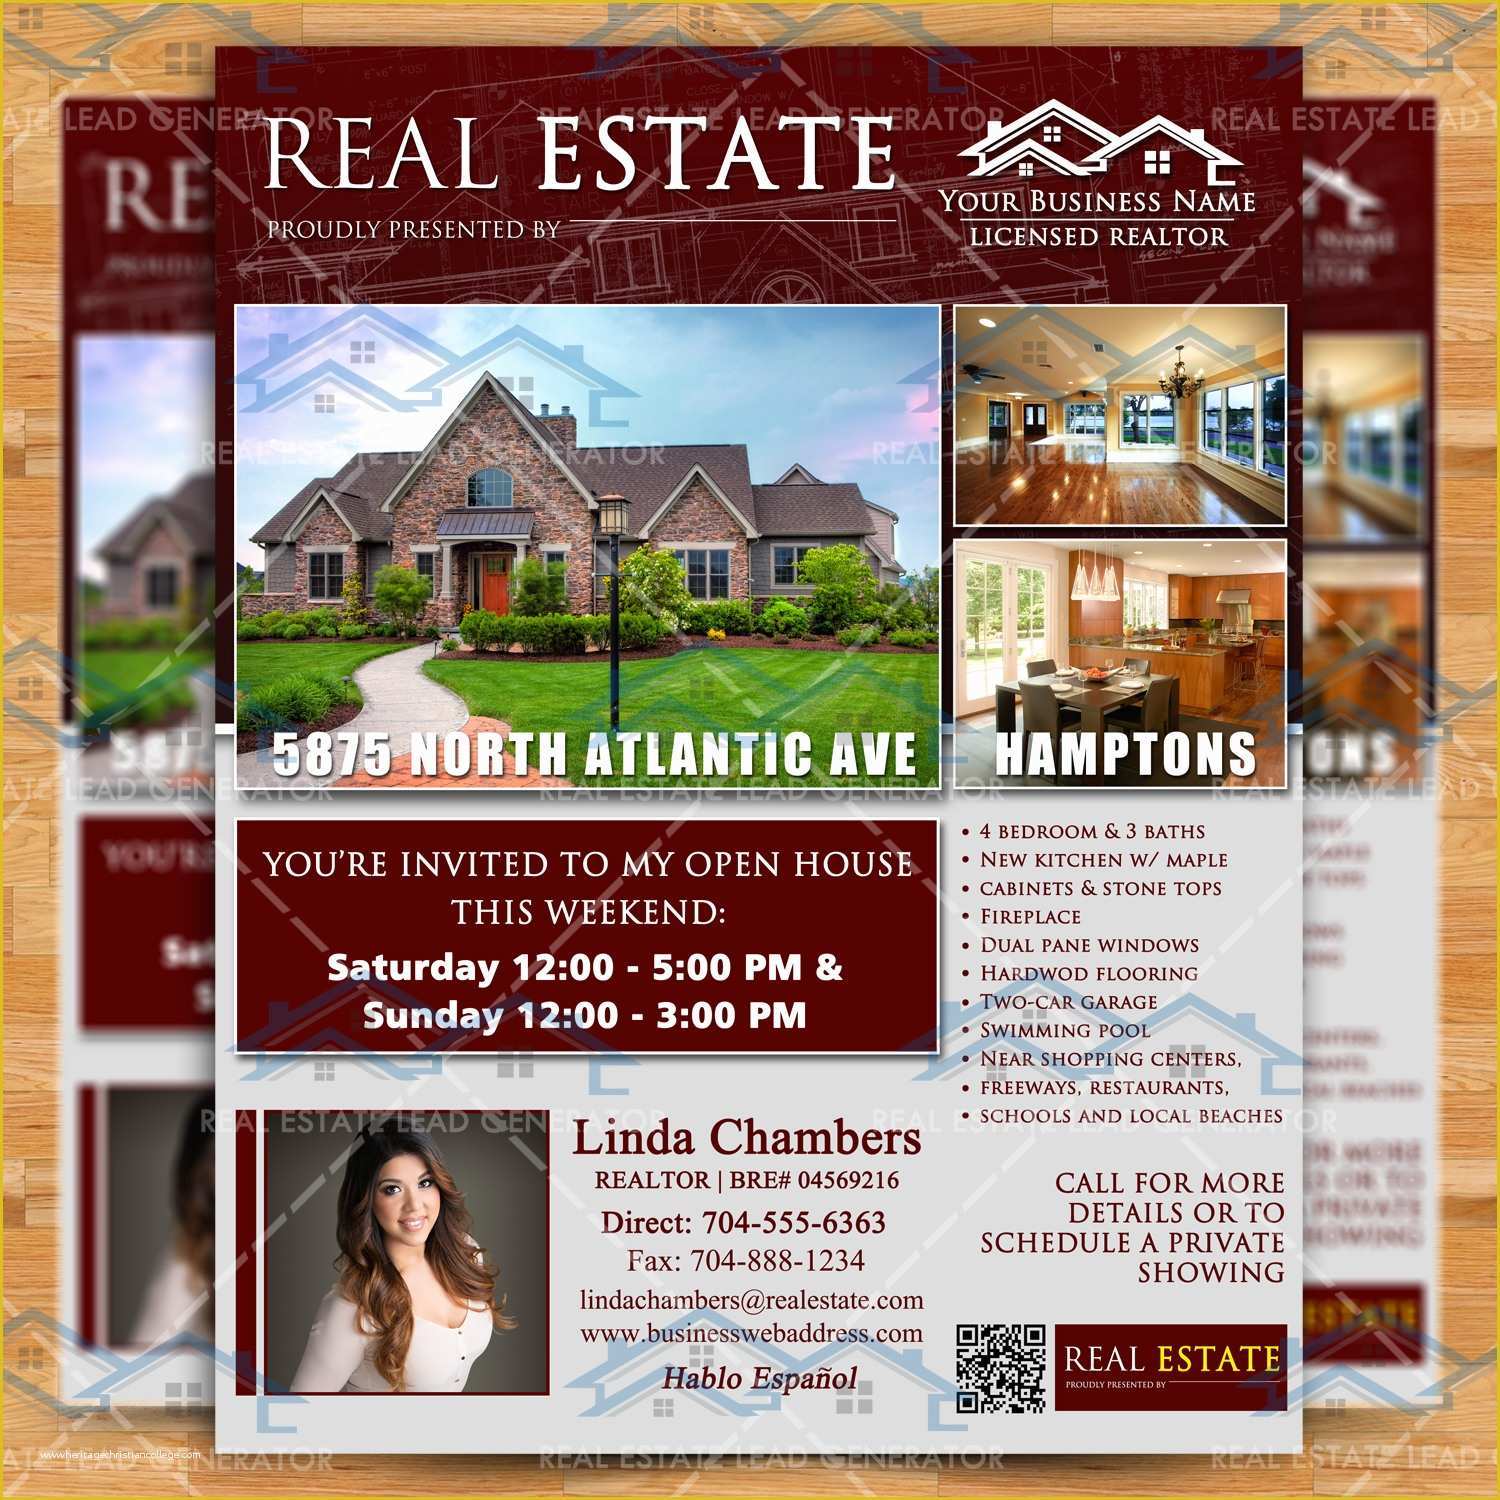 Free Real Estate Templates Of Open House Flyers Templates Yourweek 360e25eca25e